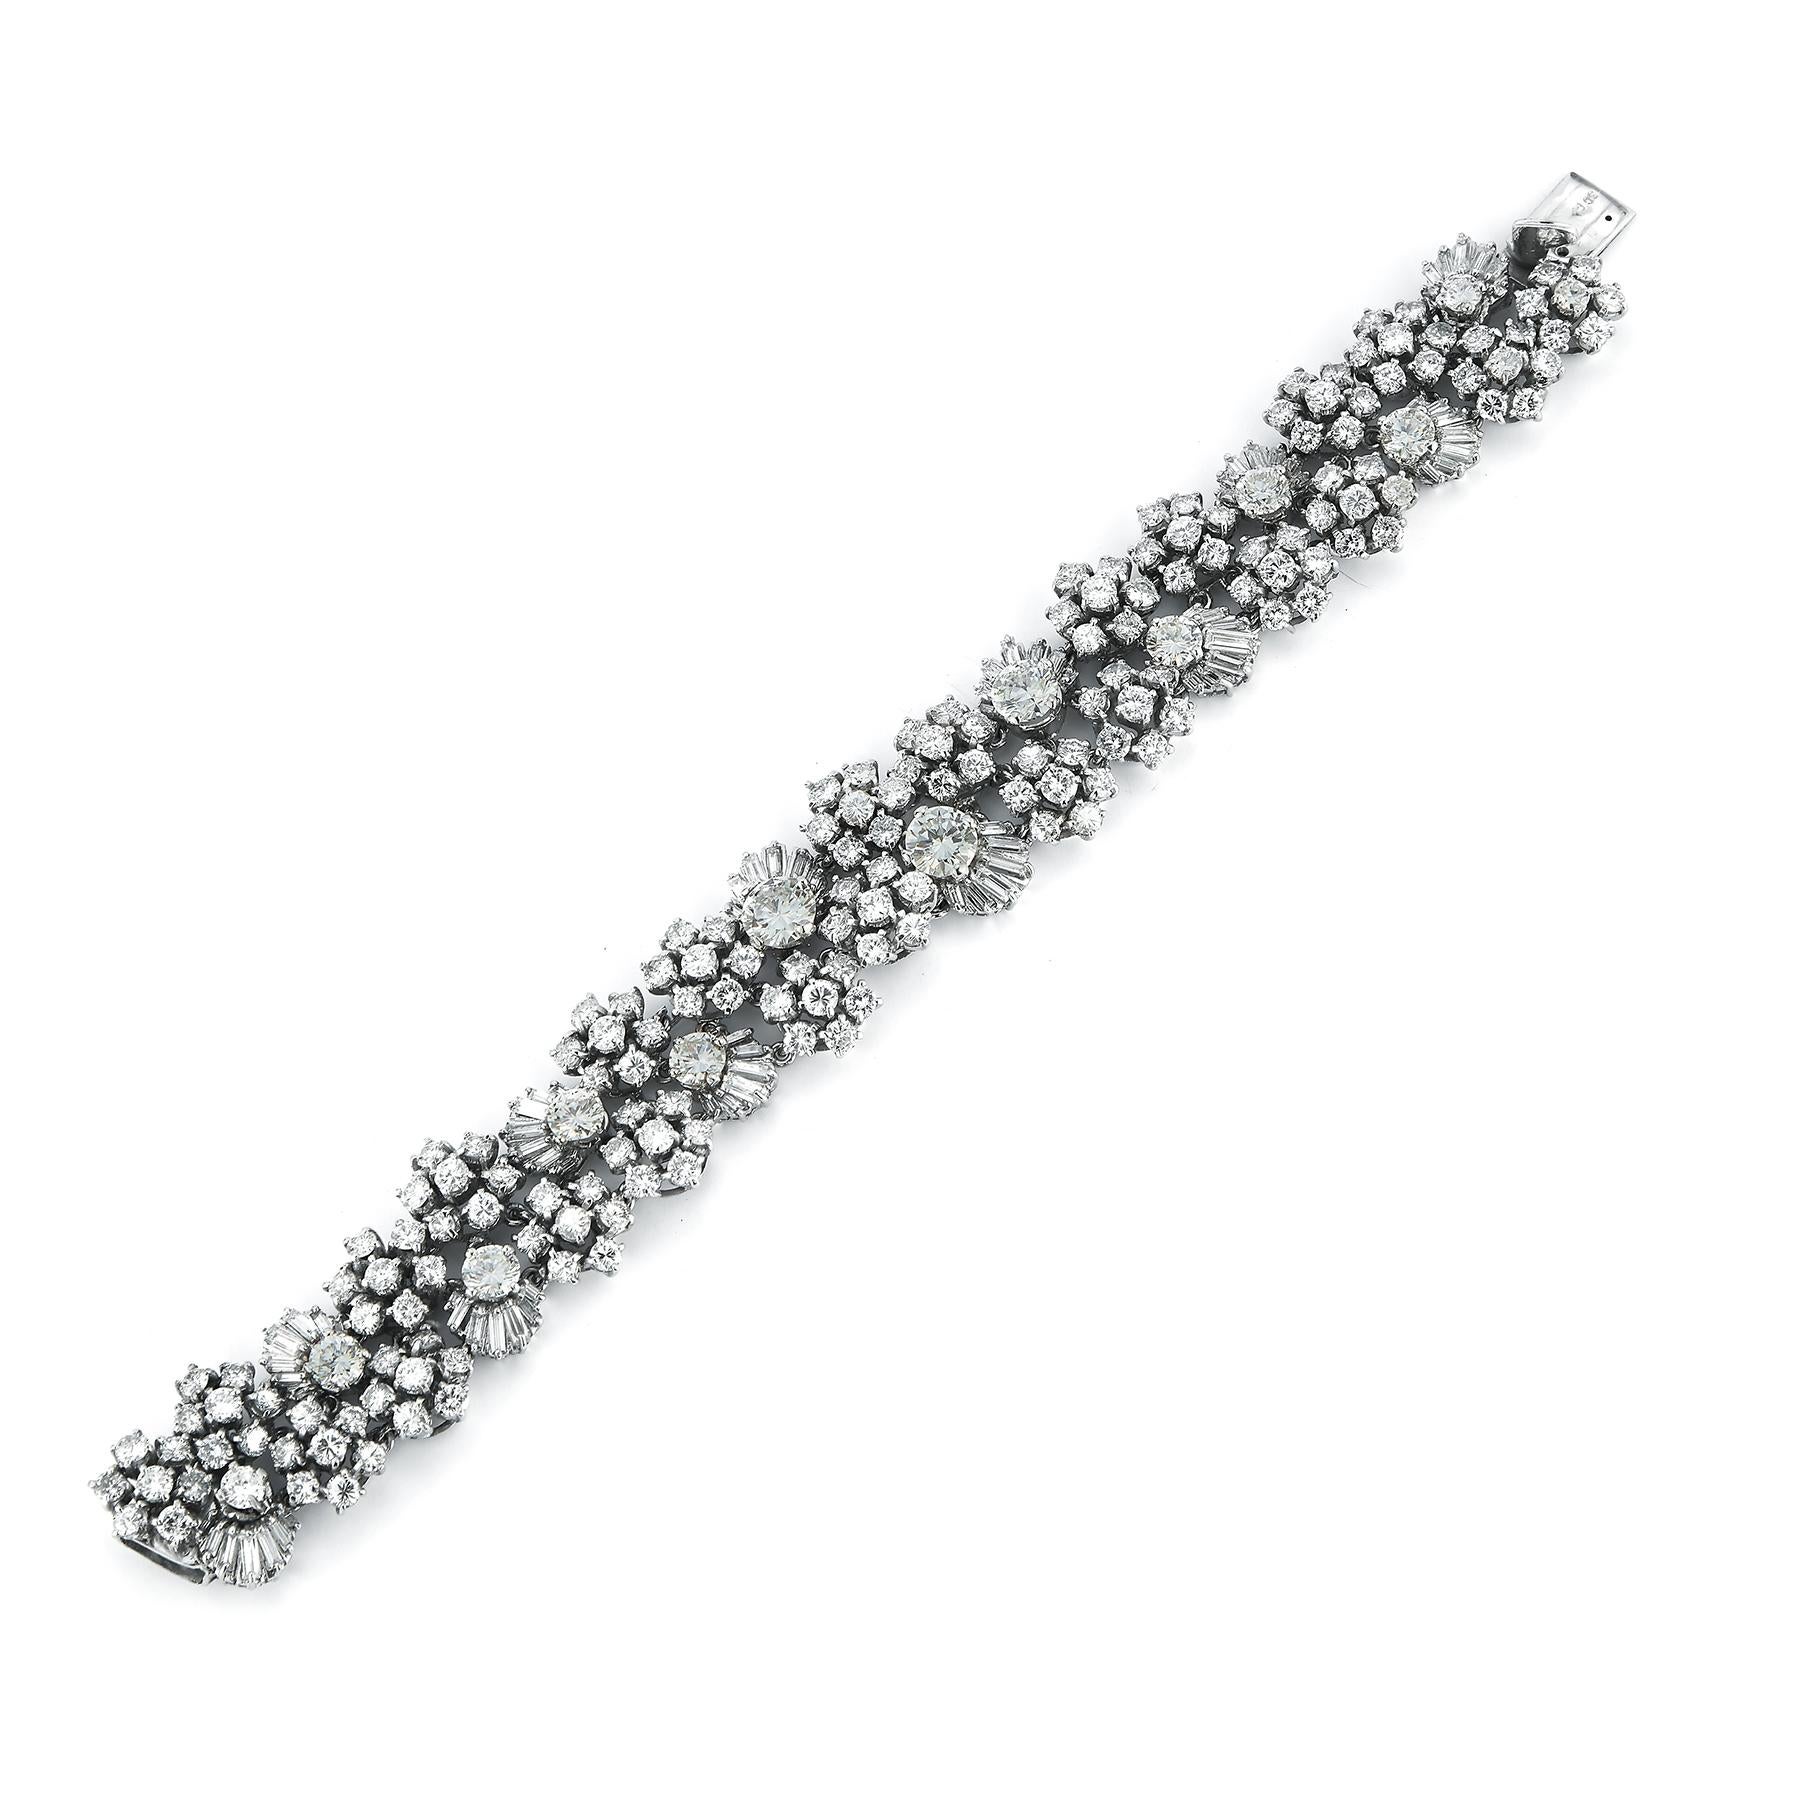 Fancy Round Cut Diamond Bracelet 
Brilliantly crafted rows and floral patterns consisting of multi-size round and brilliant cut diamonds complete this sparkling bracelet
168 Small Round-Cut Stones, 9 Medium Round-Cut Stones, 3 Large Round Stones and